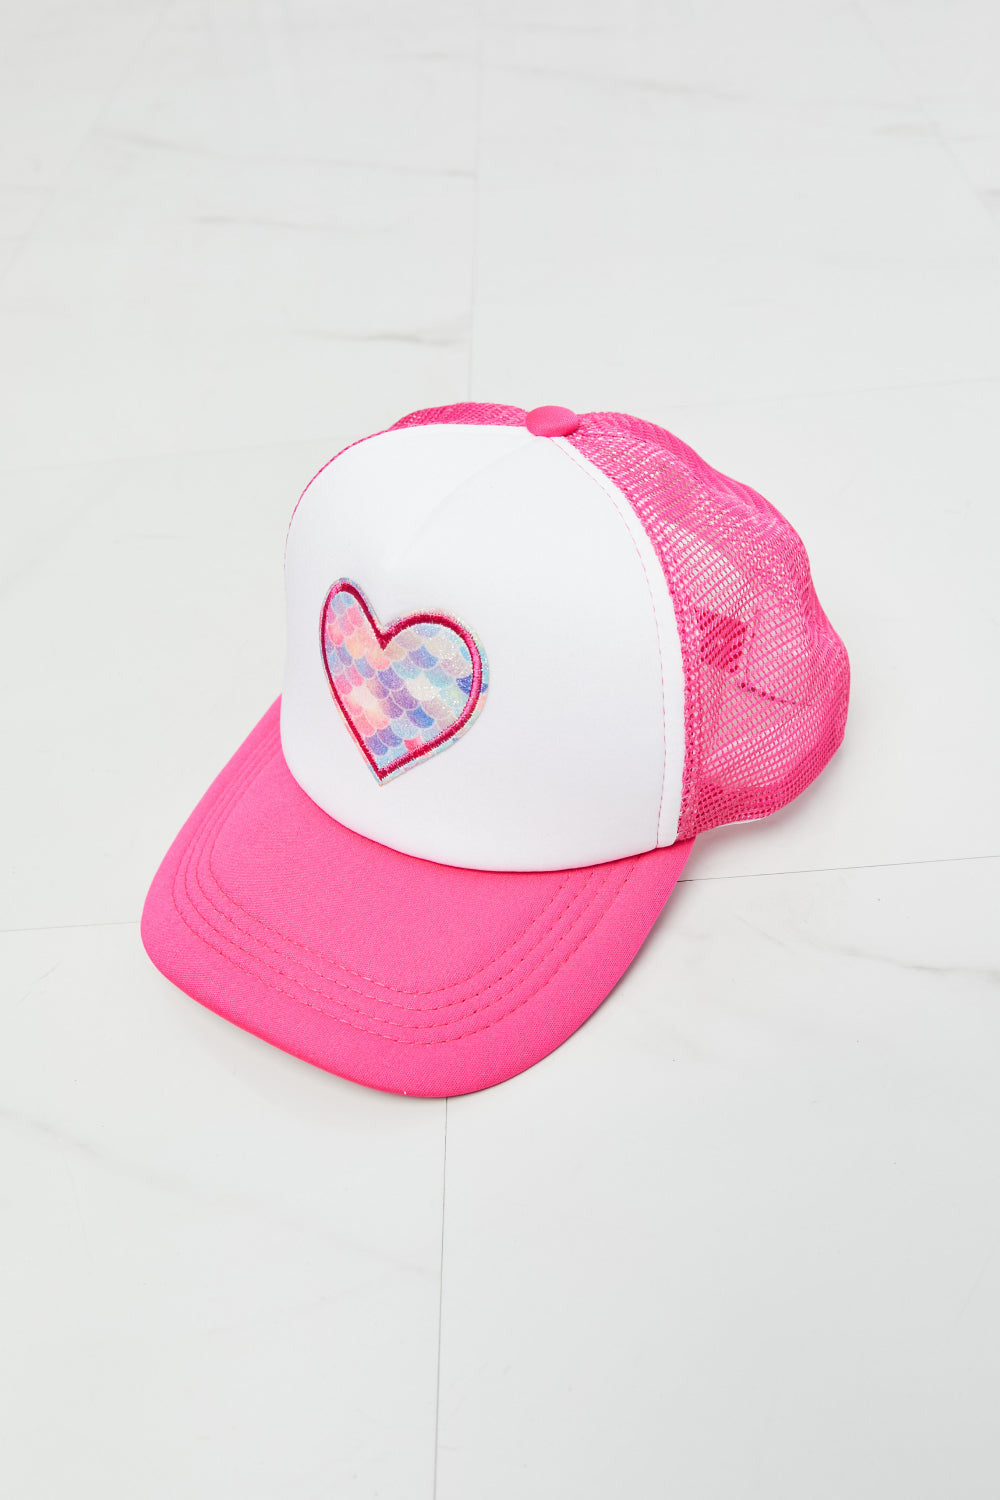 Falling For You Trucker Hat in Pink